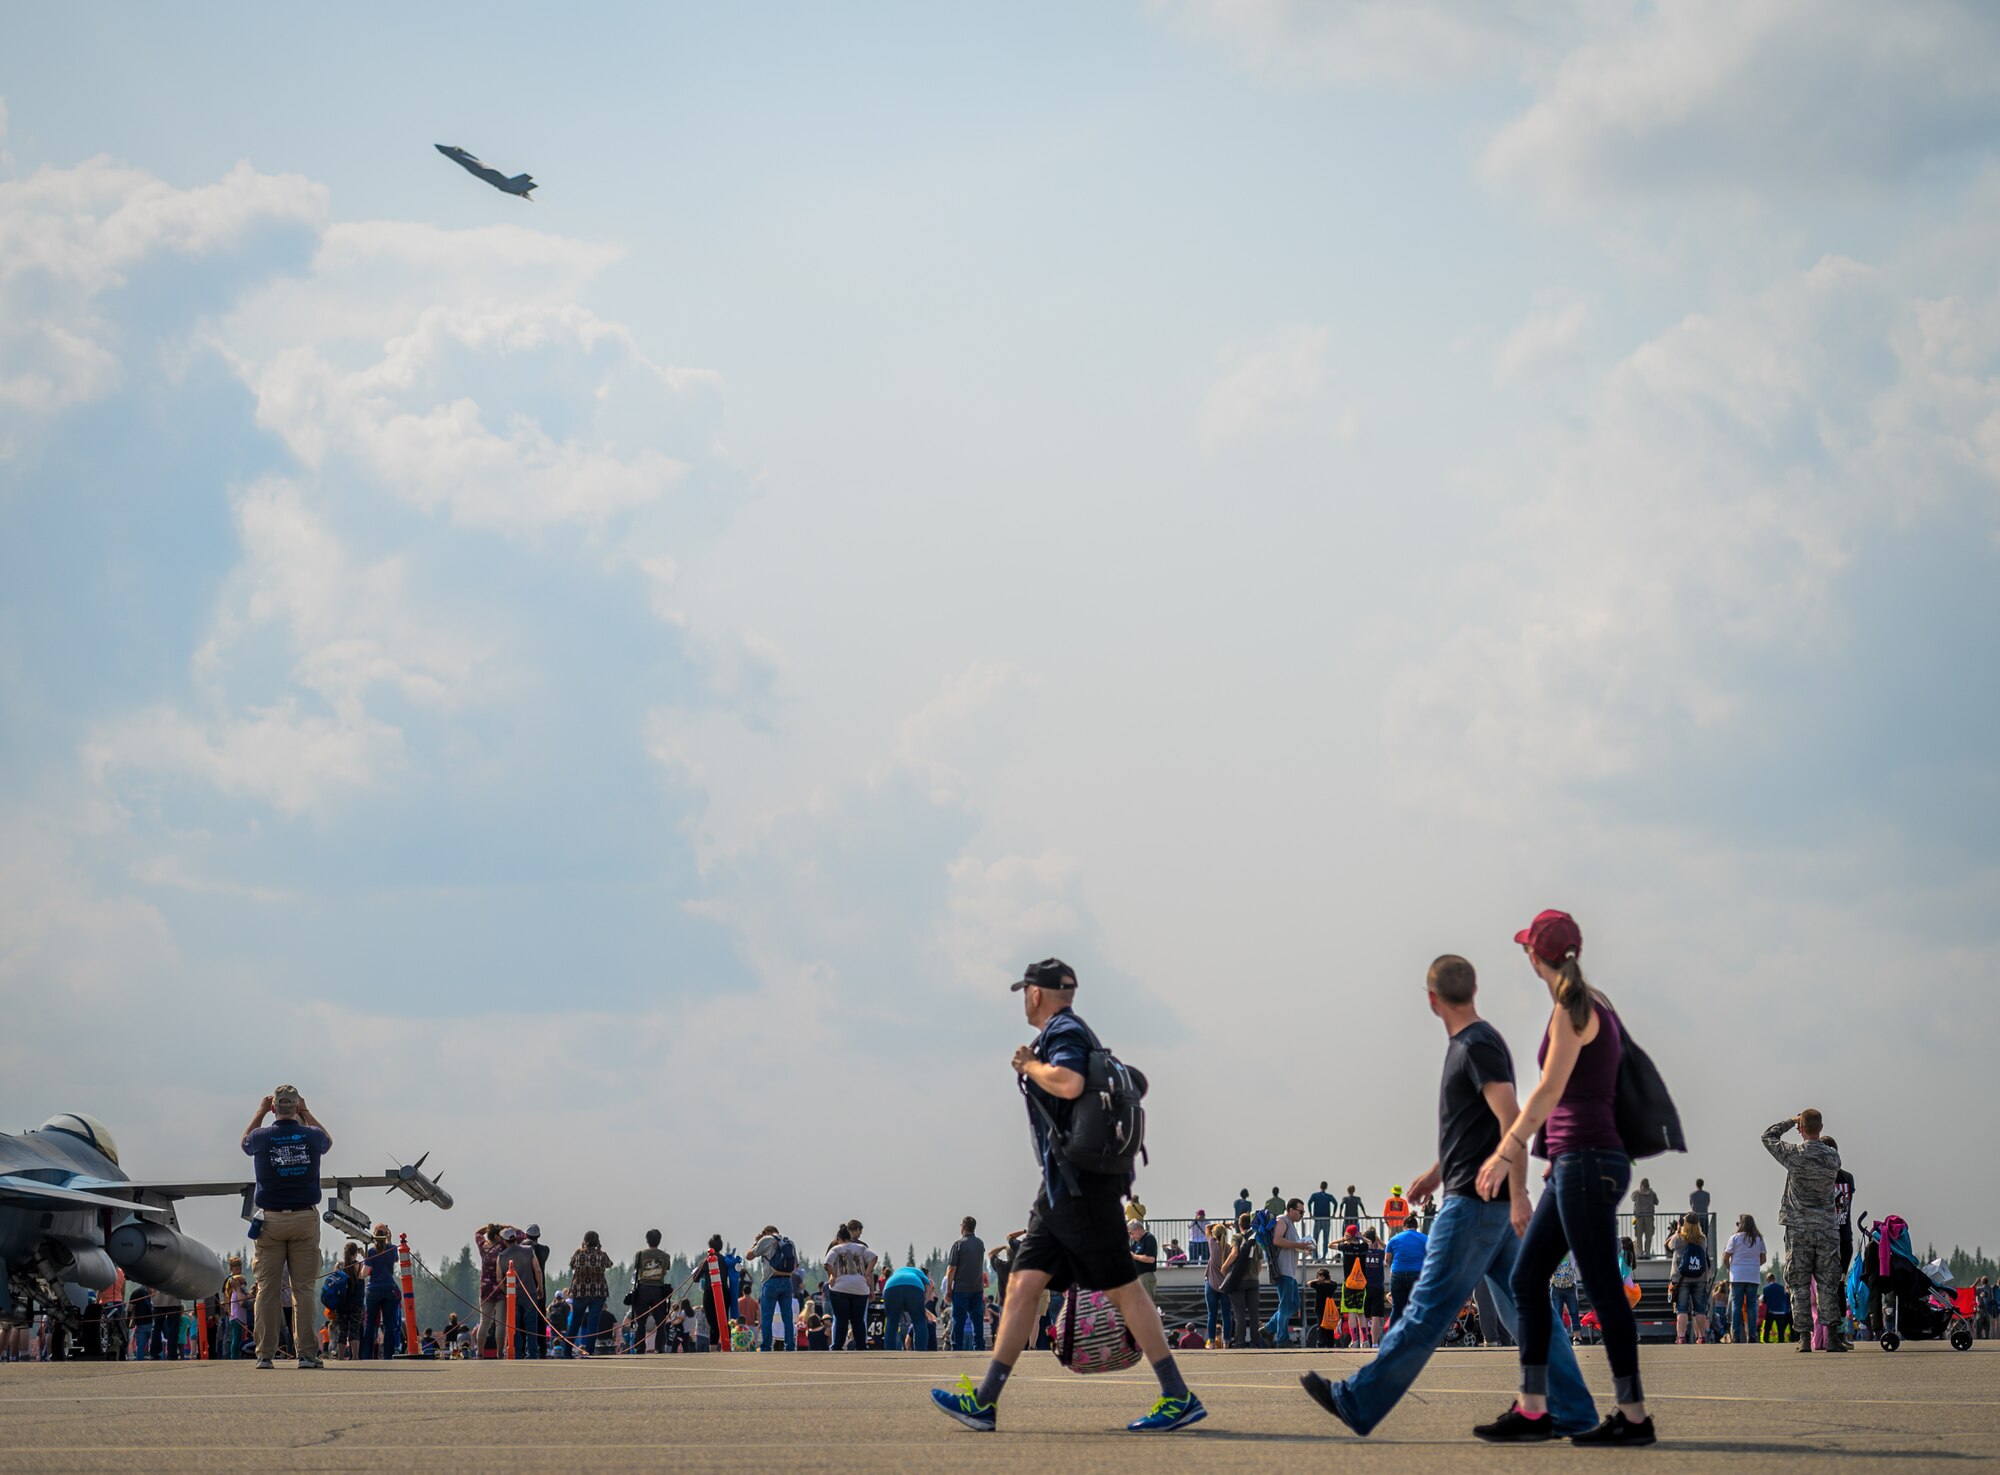 Airshow guests watch the F-35 Demonstration Team’s aerial performance during the Arctic Lightning Airshow July 13, 2019, at Eielson Air Force Base, Alaska. During the one-day event, more than 13,000 people attended the airshow. (U.S. Air Force photo by Senior Airman Alexander Cook)